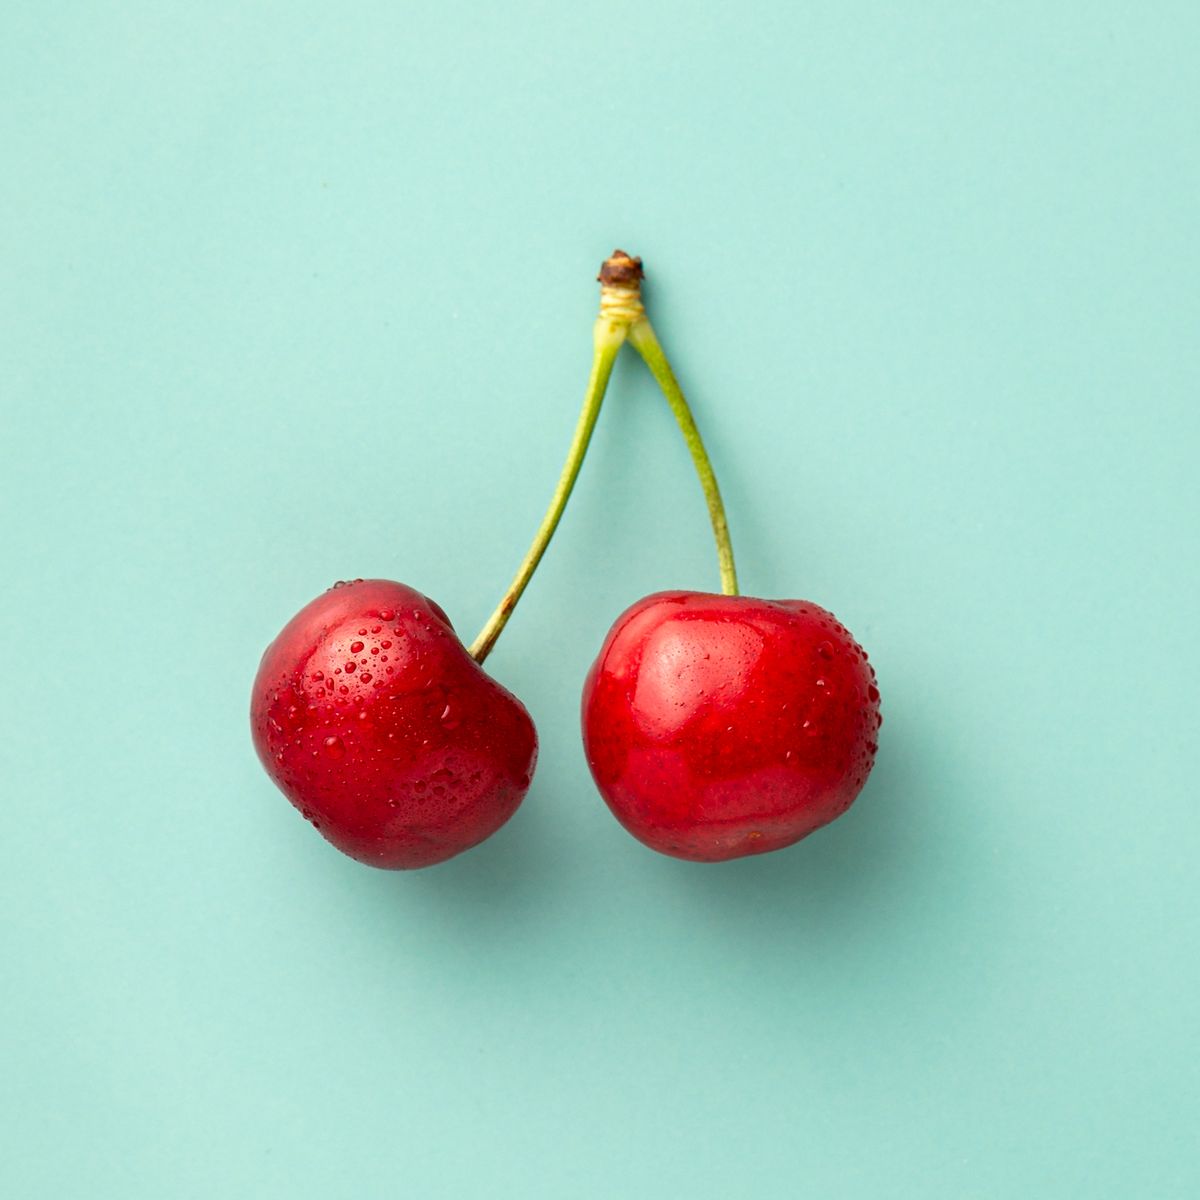 close up of cherries against turquoise background